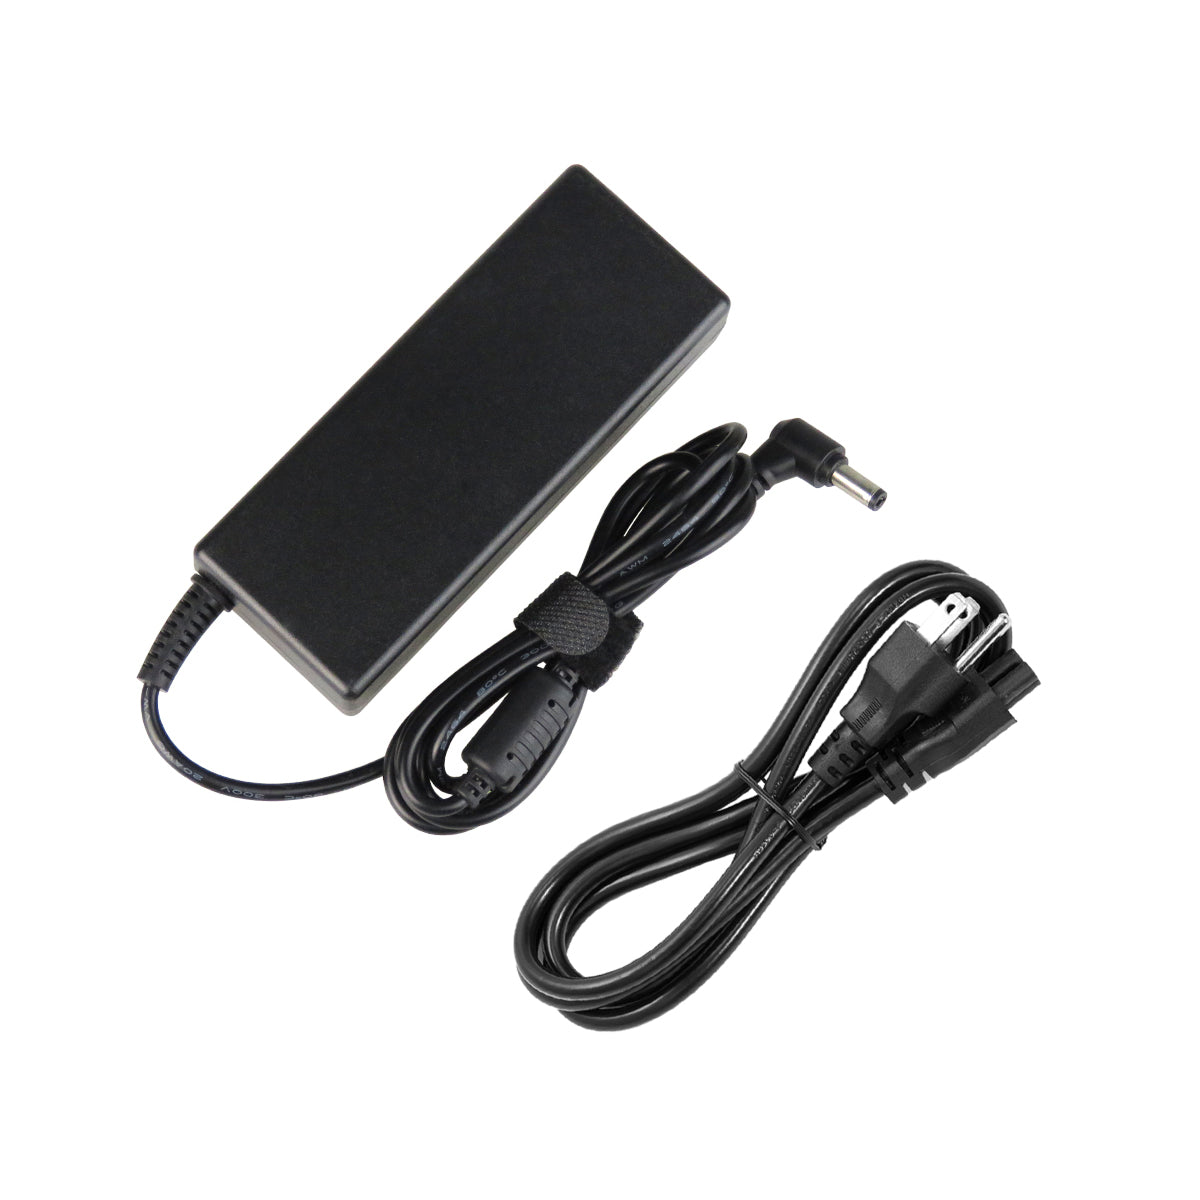 AC Adapter Charger for ASUS N61VN Notebook.